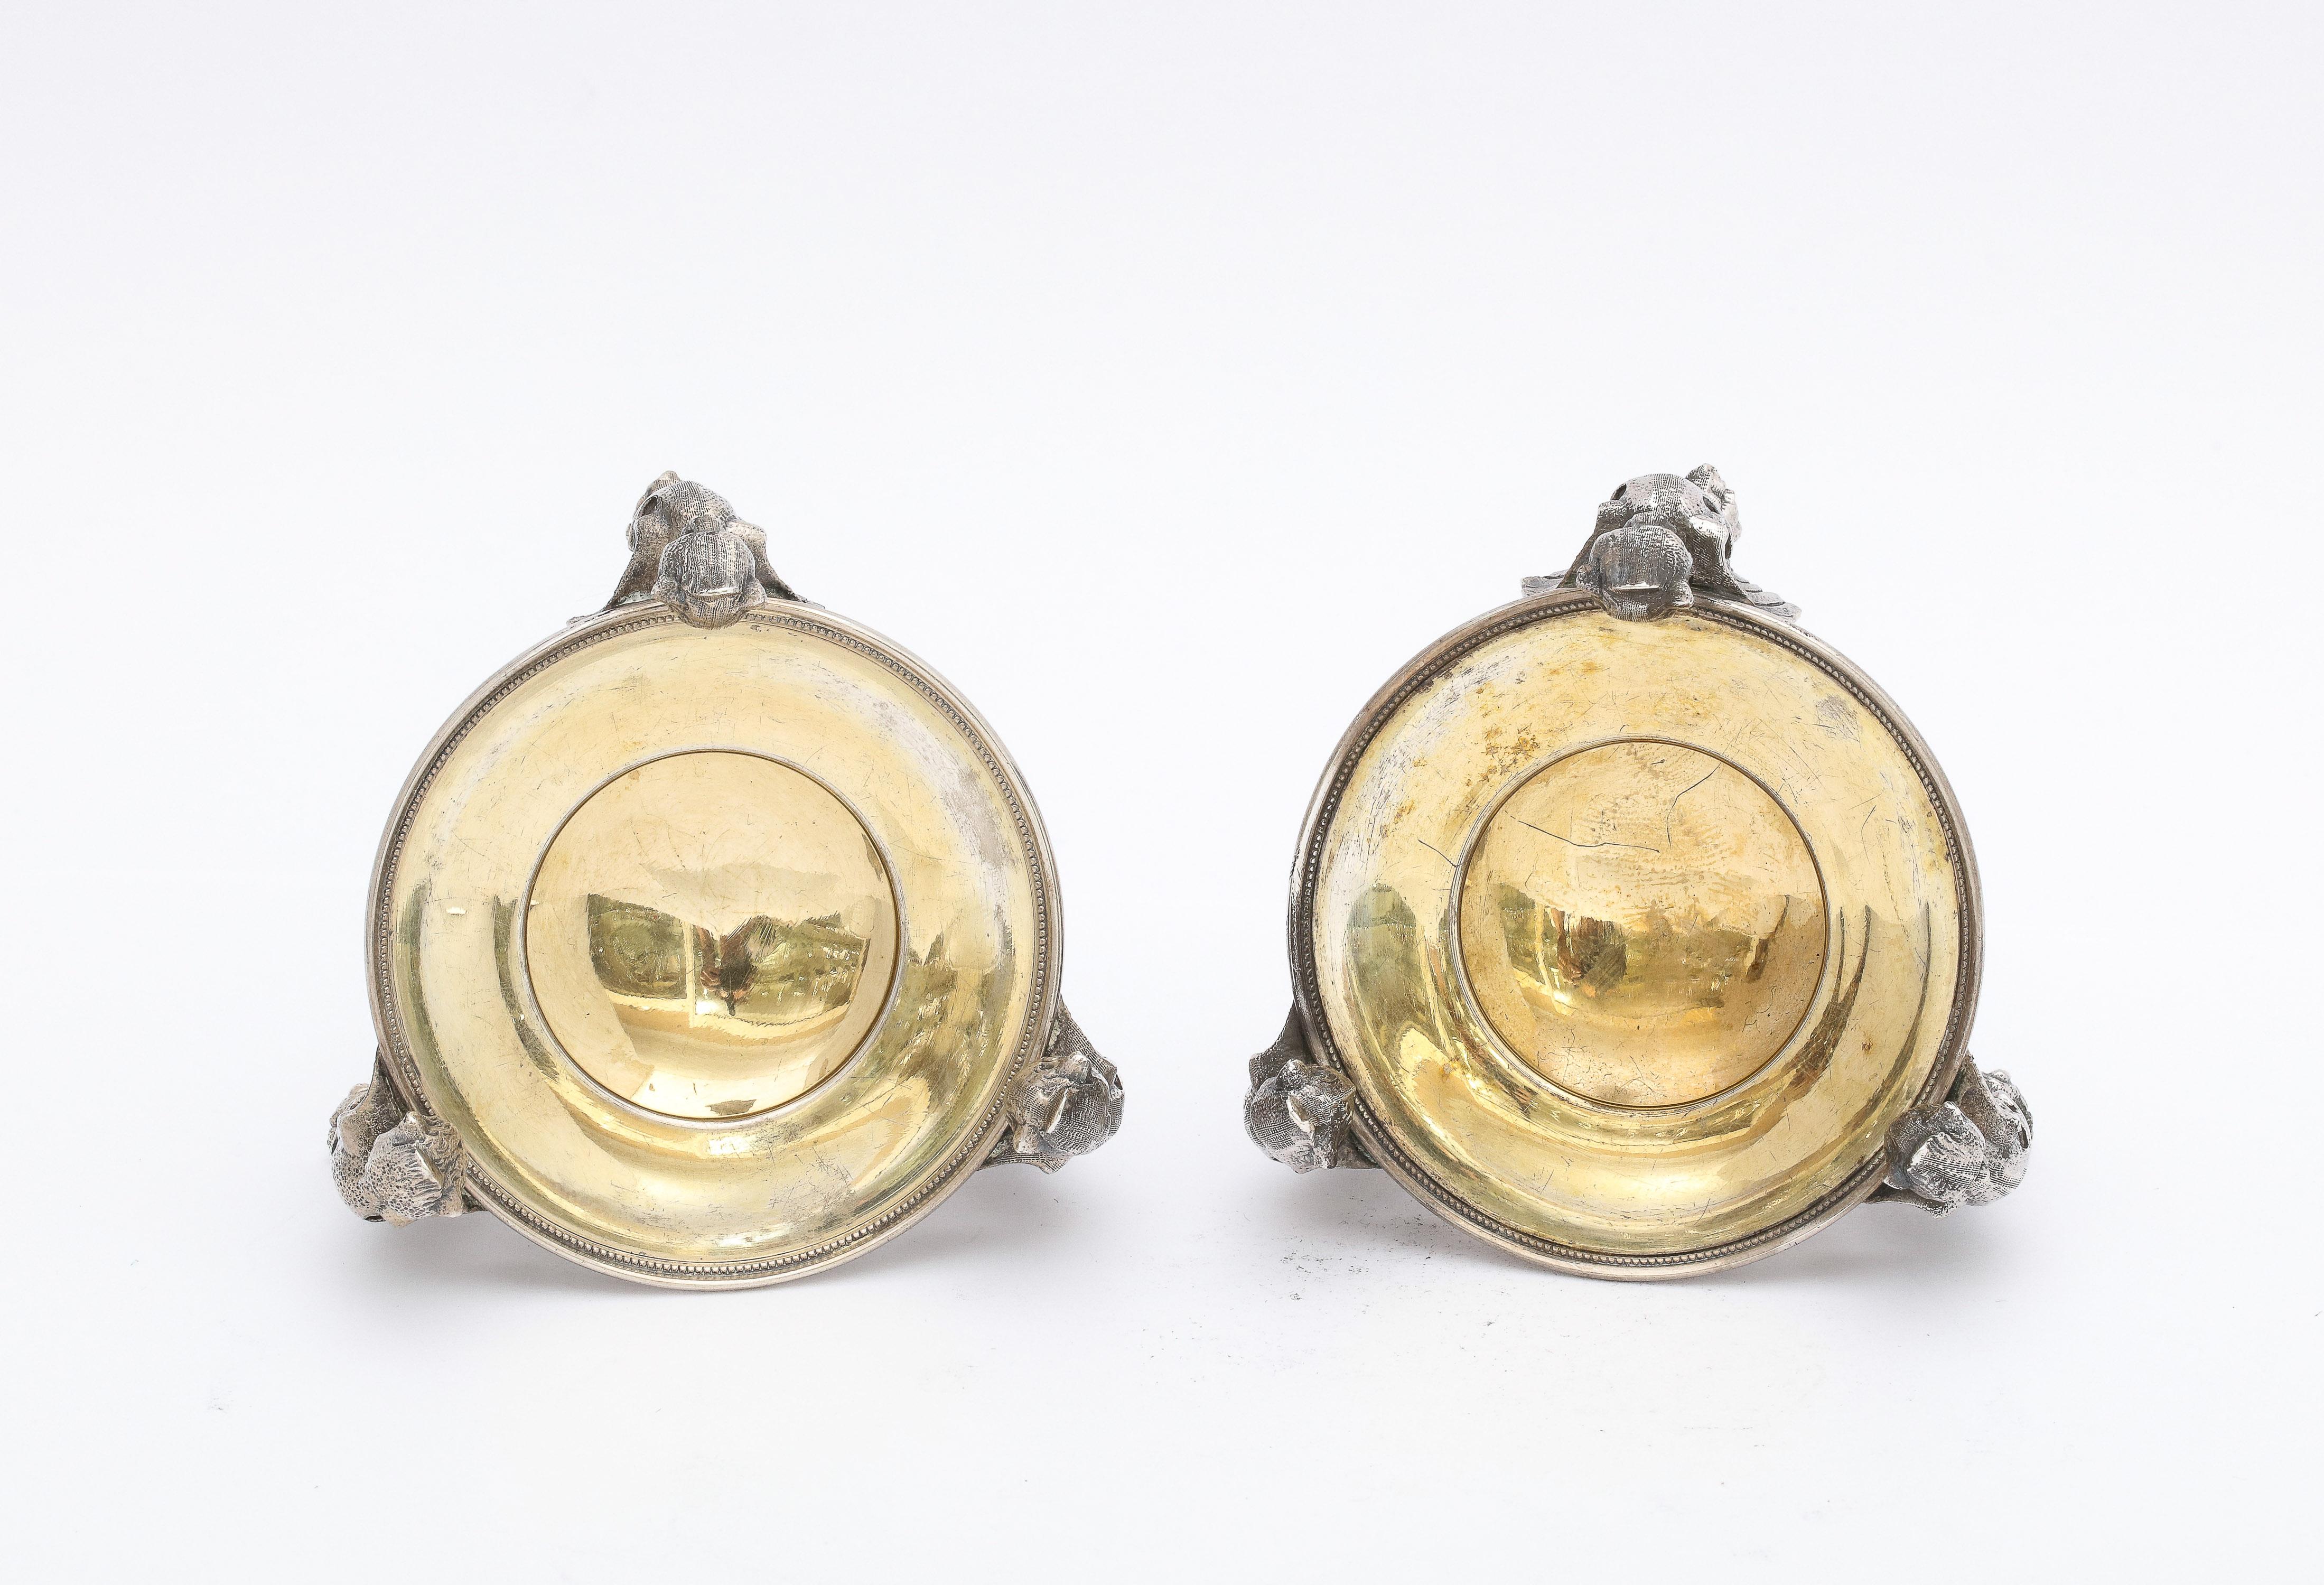 Pair of Neoclassical-Style Parcel Gilt Coin Silver Footed Salt Cellars By Gorham For Sale 9